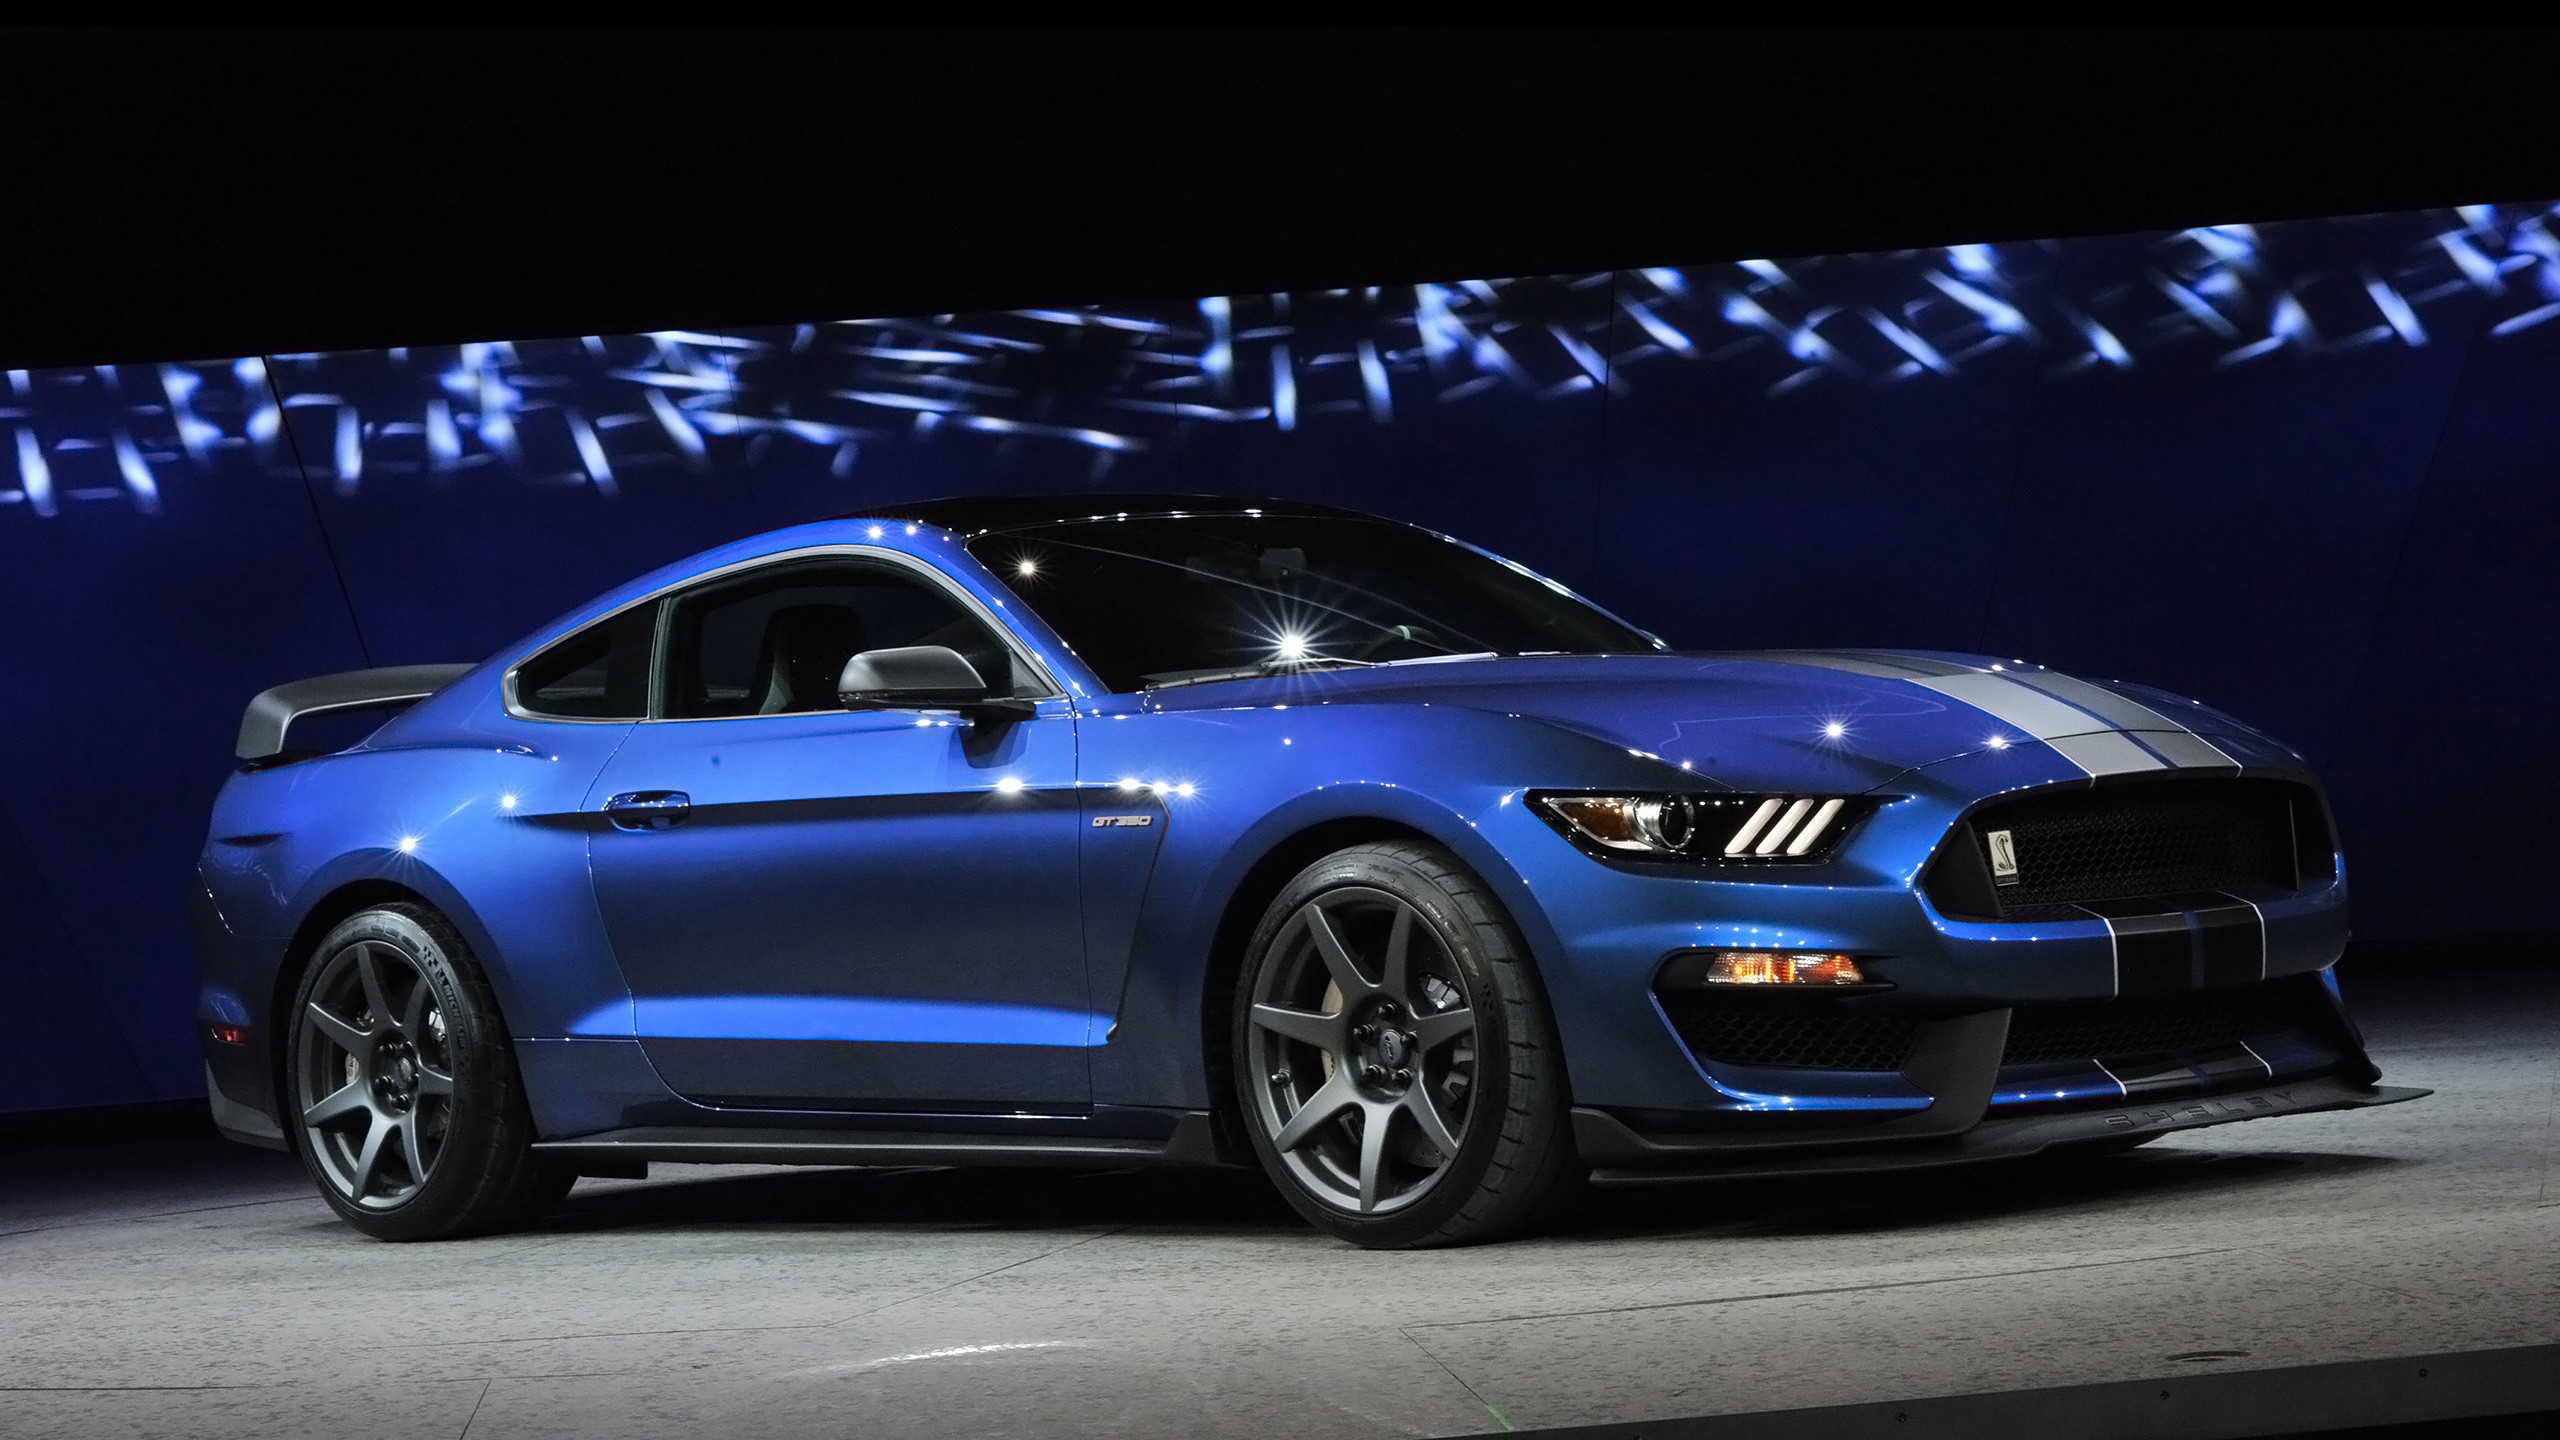 2560x1440 mustang gt350r wallpaper 2016 Ford Shelby GT350R Mustang 2 Wallpaper HD Car  Wallpapers ID #5045